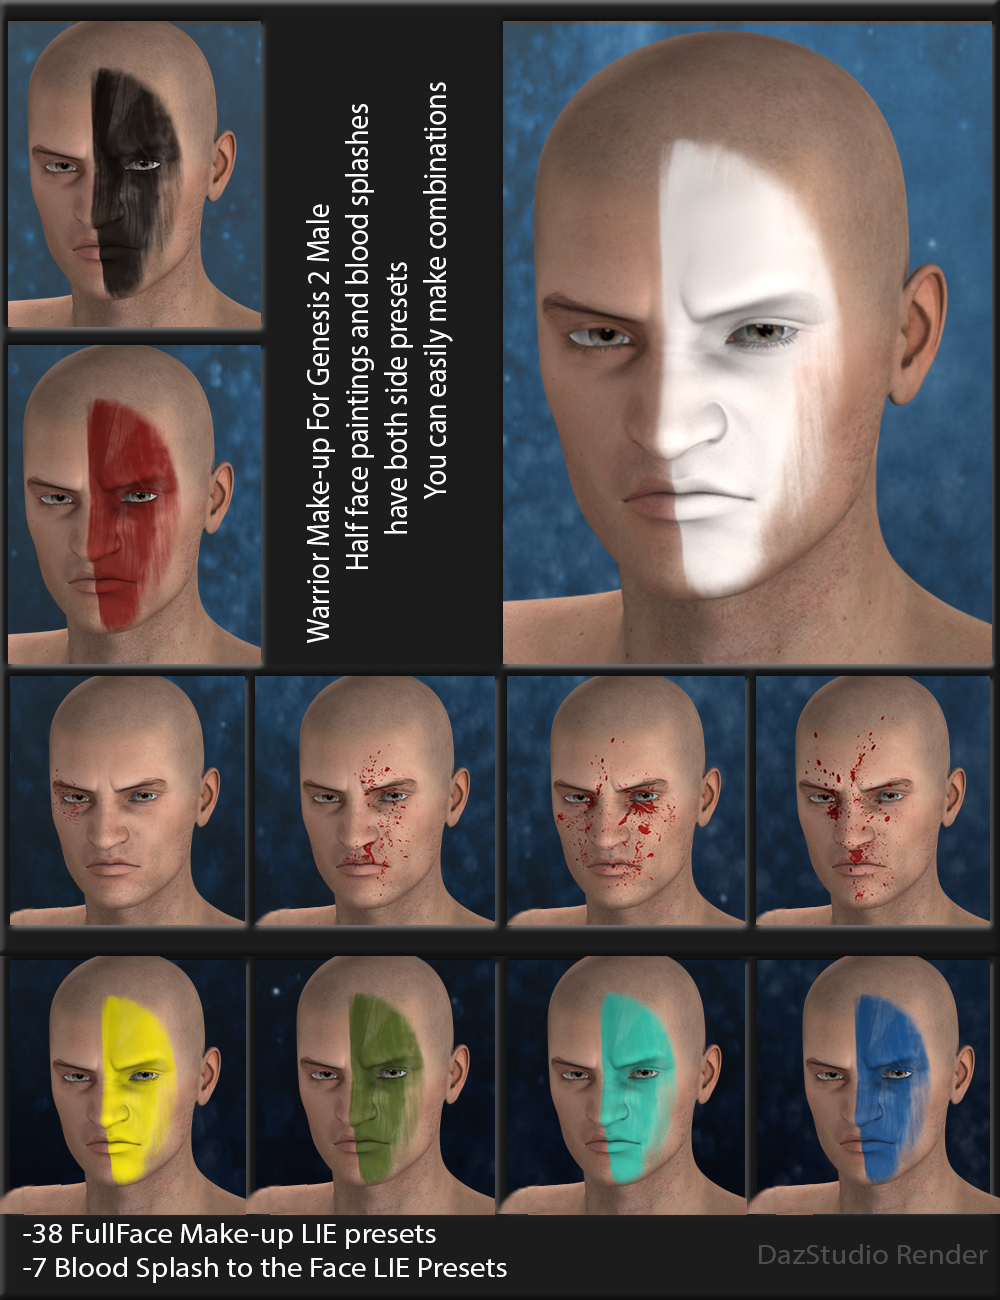 Warrior Make-up for Genesis 2 Male(s) by: Neikdian, 3D Models by Daz 3D